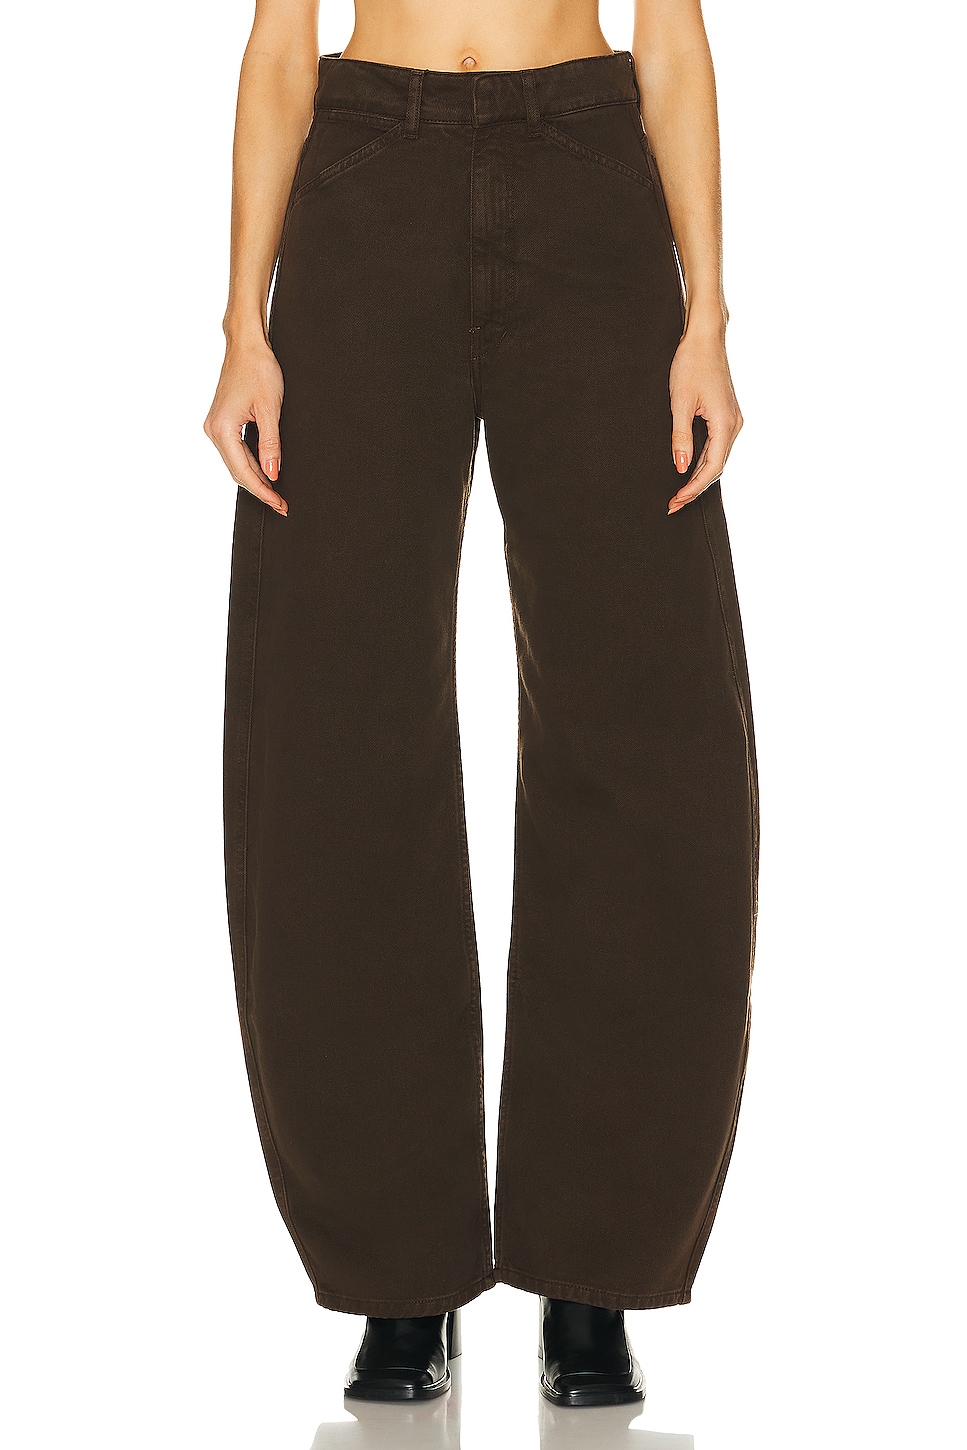 Image 1 of Lemaire High Waisted Curved Pant in Espresso